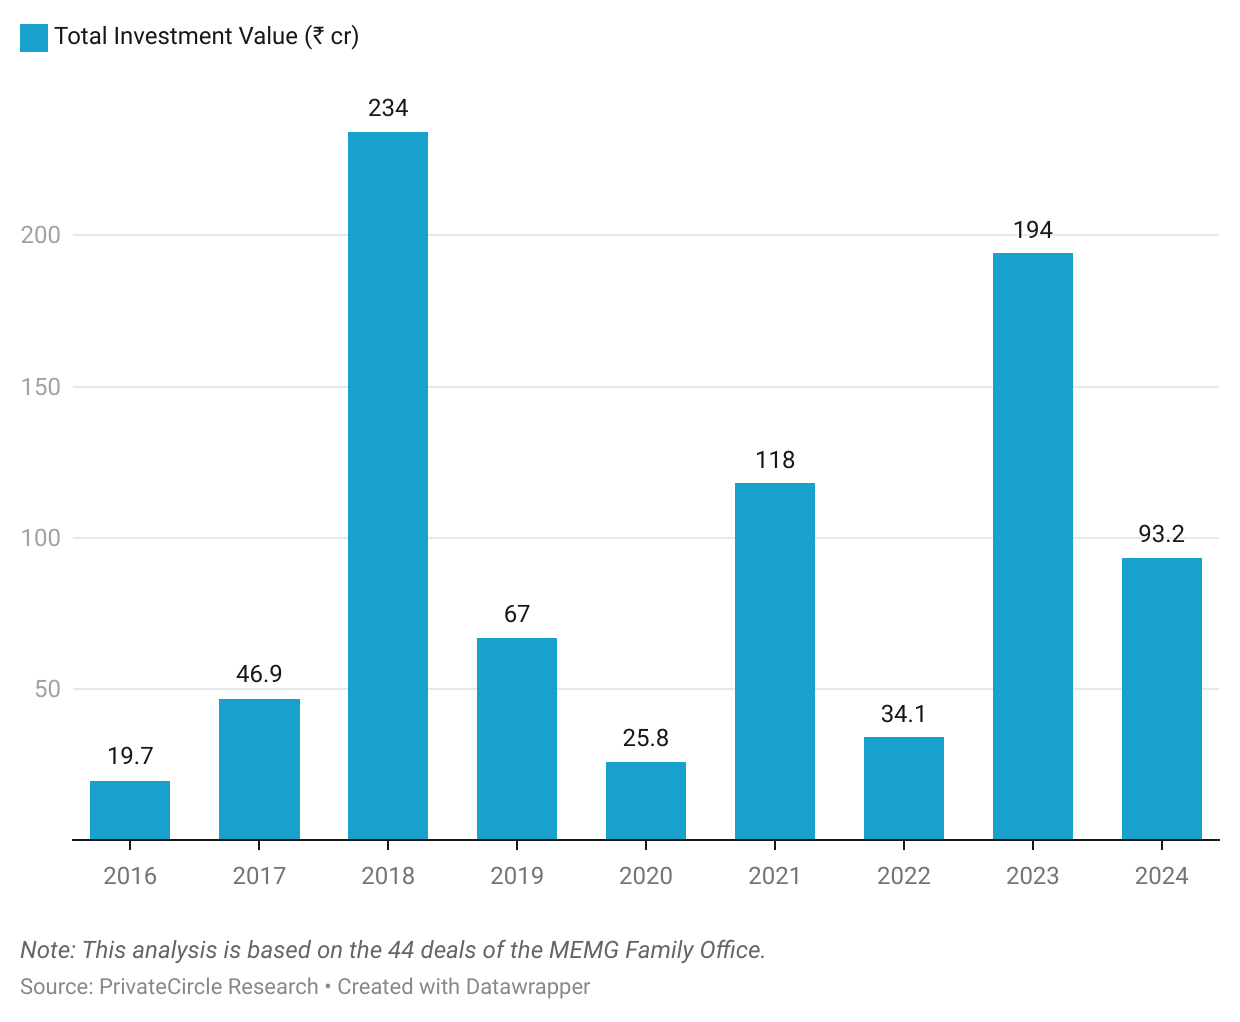 MEMG Family Office 2024: YOY Investment Trend.

MEMG Family Office investment value saw spikes in 2018, 2021 and 2023. Showing the firm's increased activity even in the middle of a funding winter.

Note: This analysis is based on the 44 deals of the MEMG Family Office.
